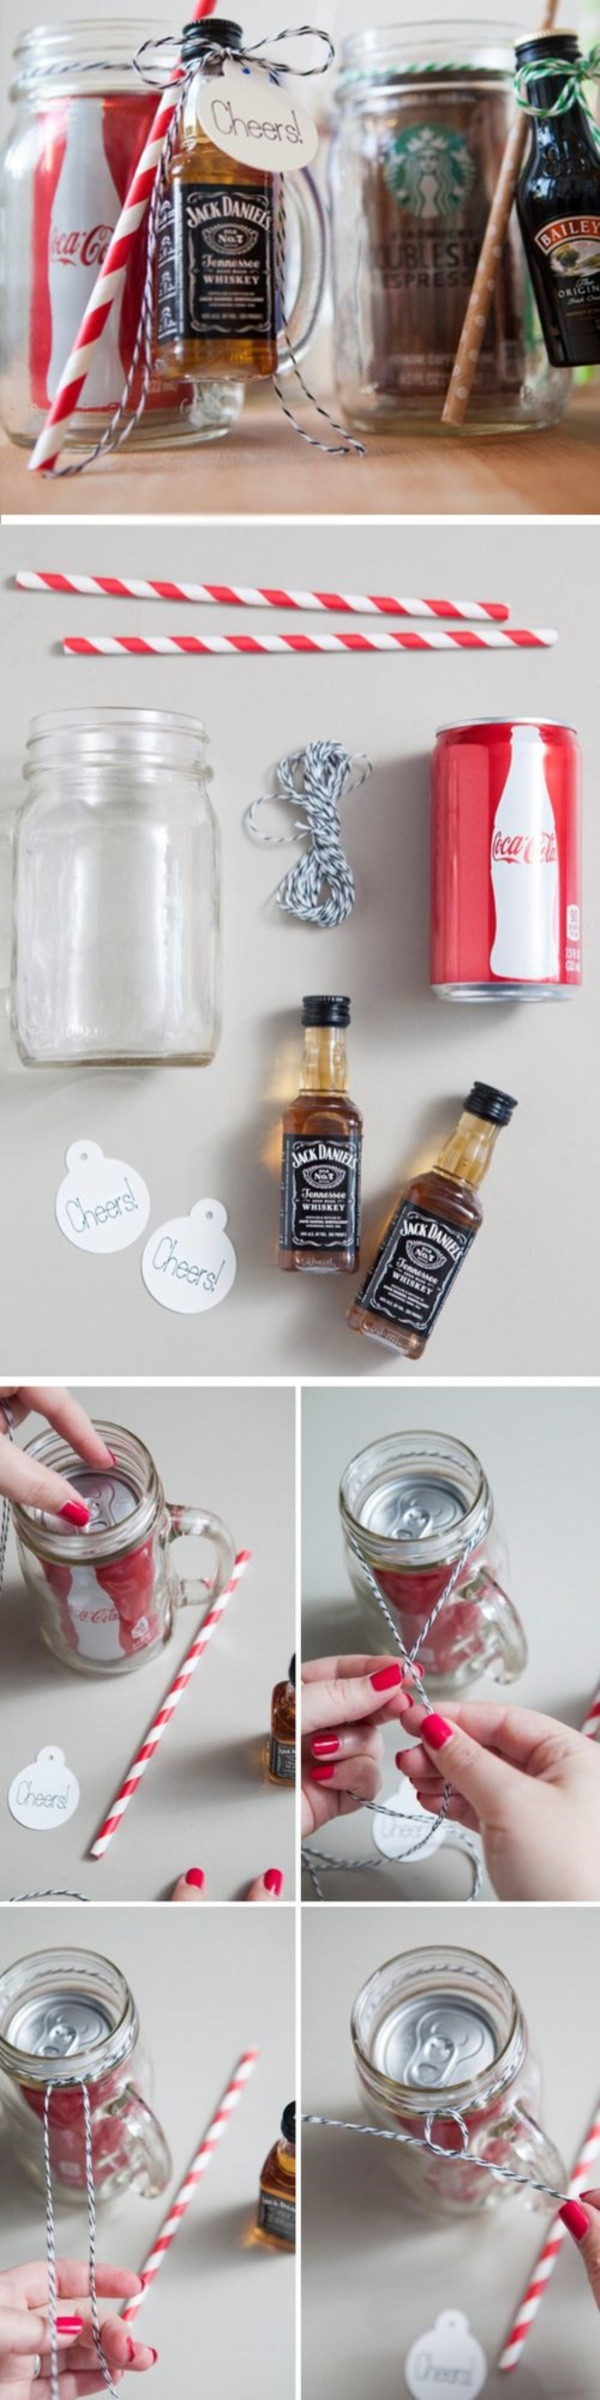 Christmas Gifts For Him Pinterest
 101 Homemade Valentines Day Ideas for Him that re really CUTE